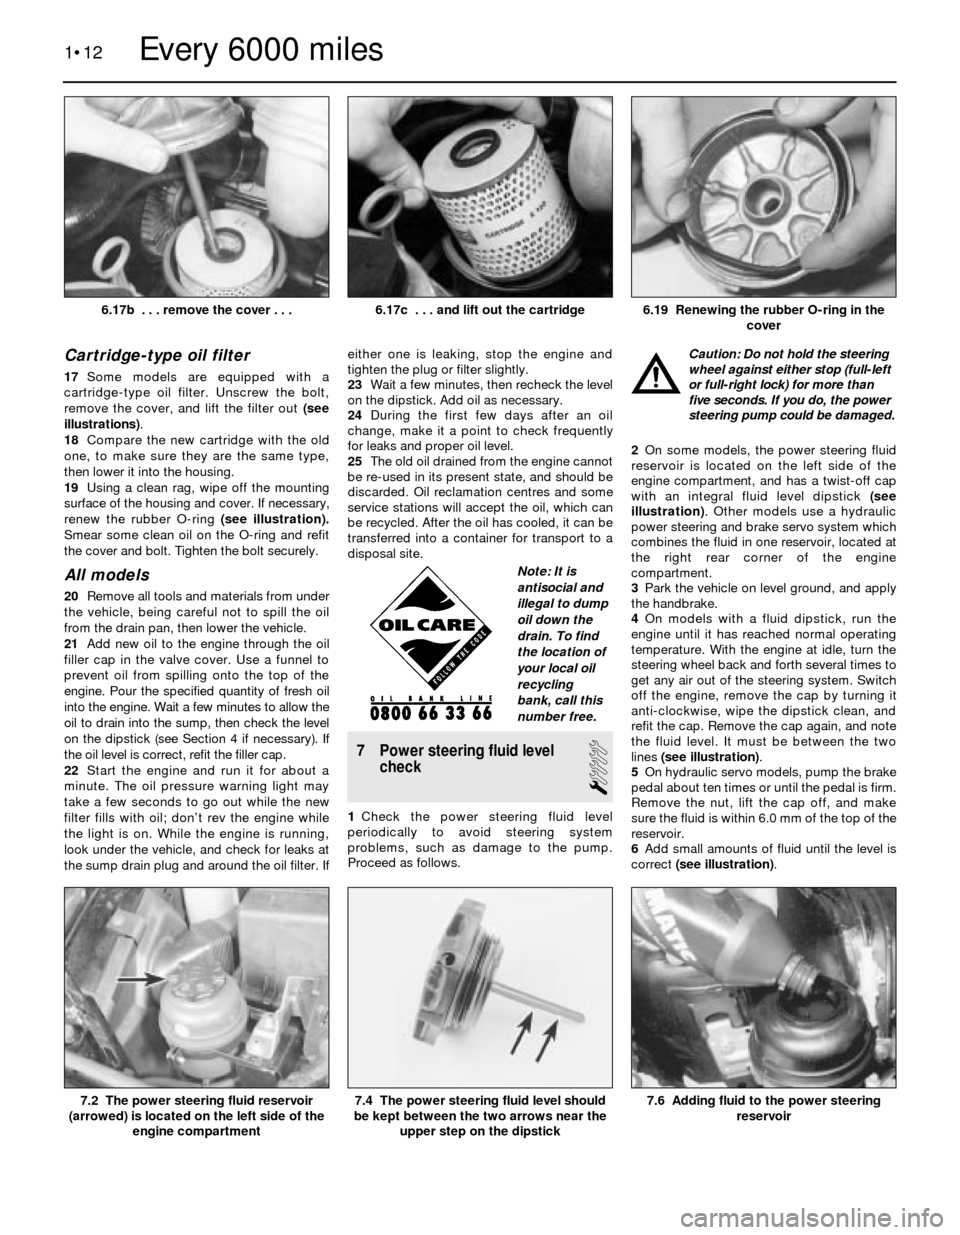 BMW 3 SERIES 1991 E30 Workshop Manual Cartridge-type oil filter
17Some models are equipped with a
cartridge-type oil filter. Unscrew the bolt,
remove the cover, and lift the filter out (see
illustrations).
18Compare the new cartridge with